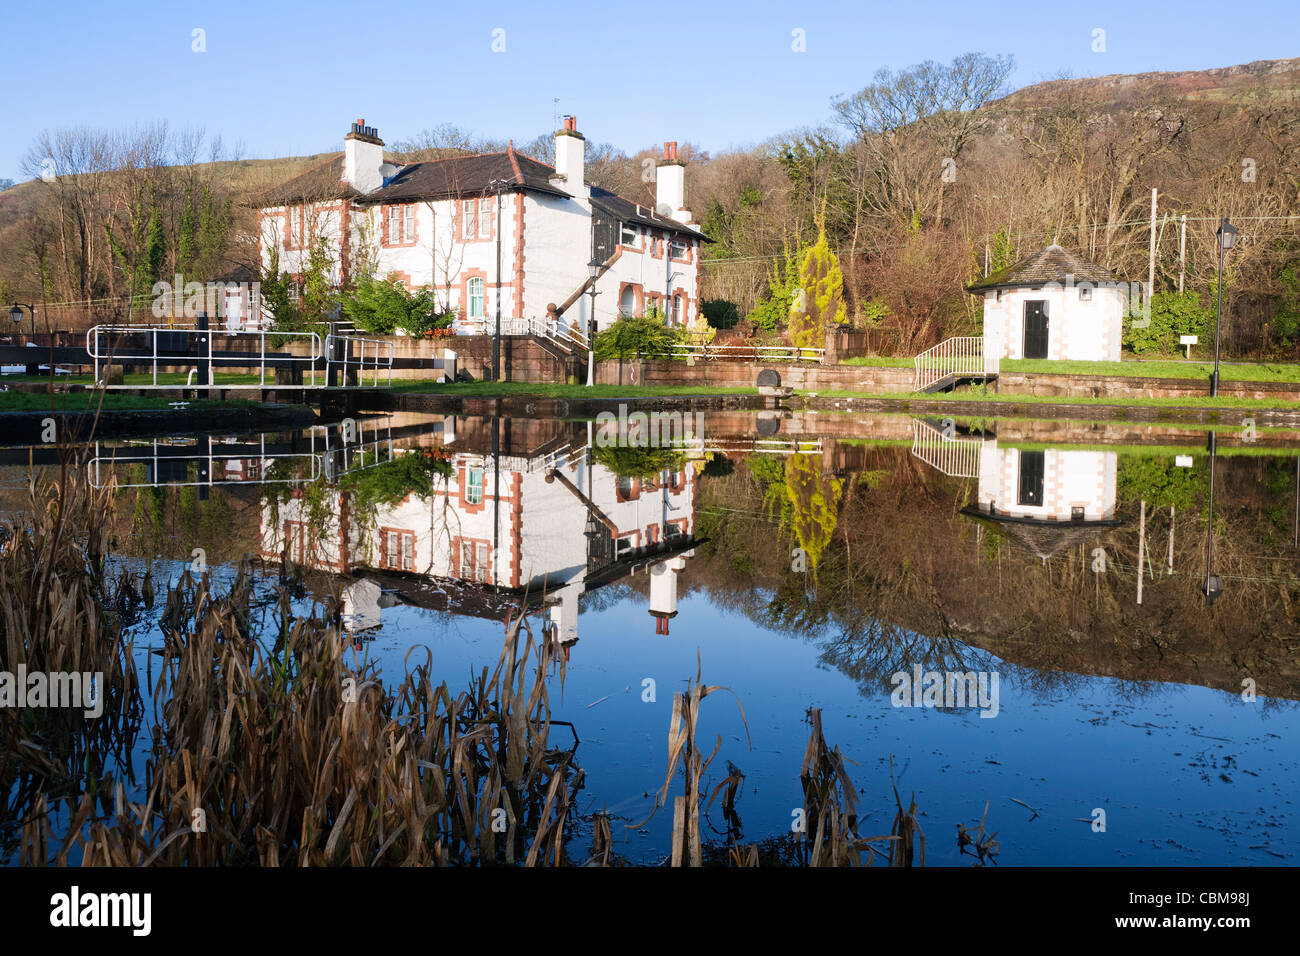 The Forth and Clyde Canal at Bowling, West Dunbartonshire, Scotland. Stock Photo